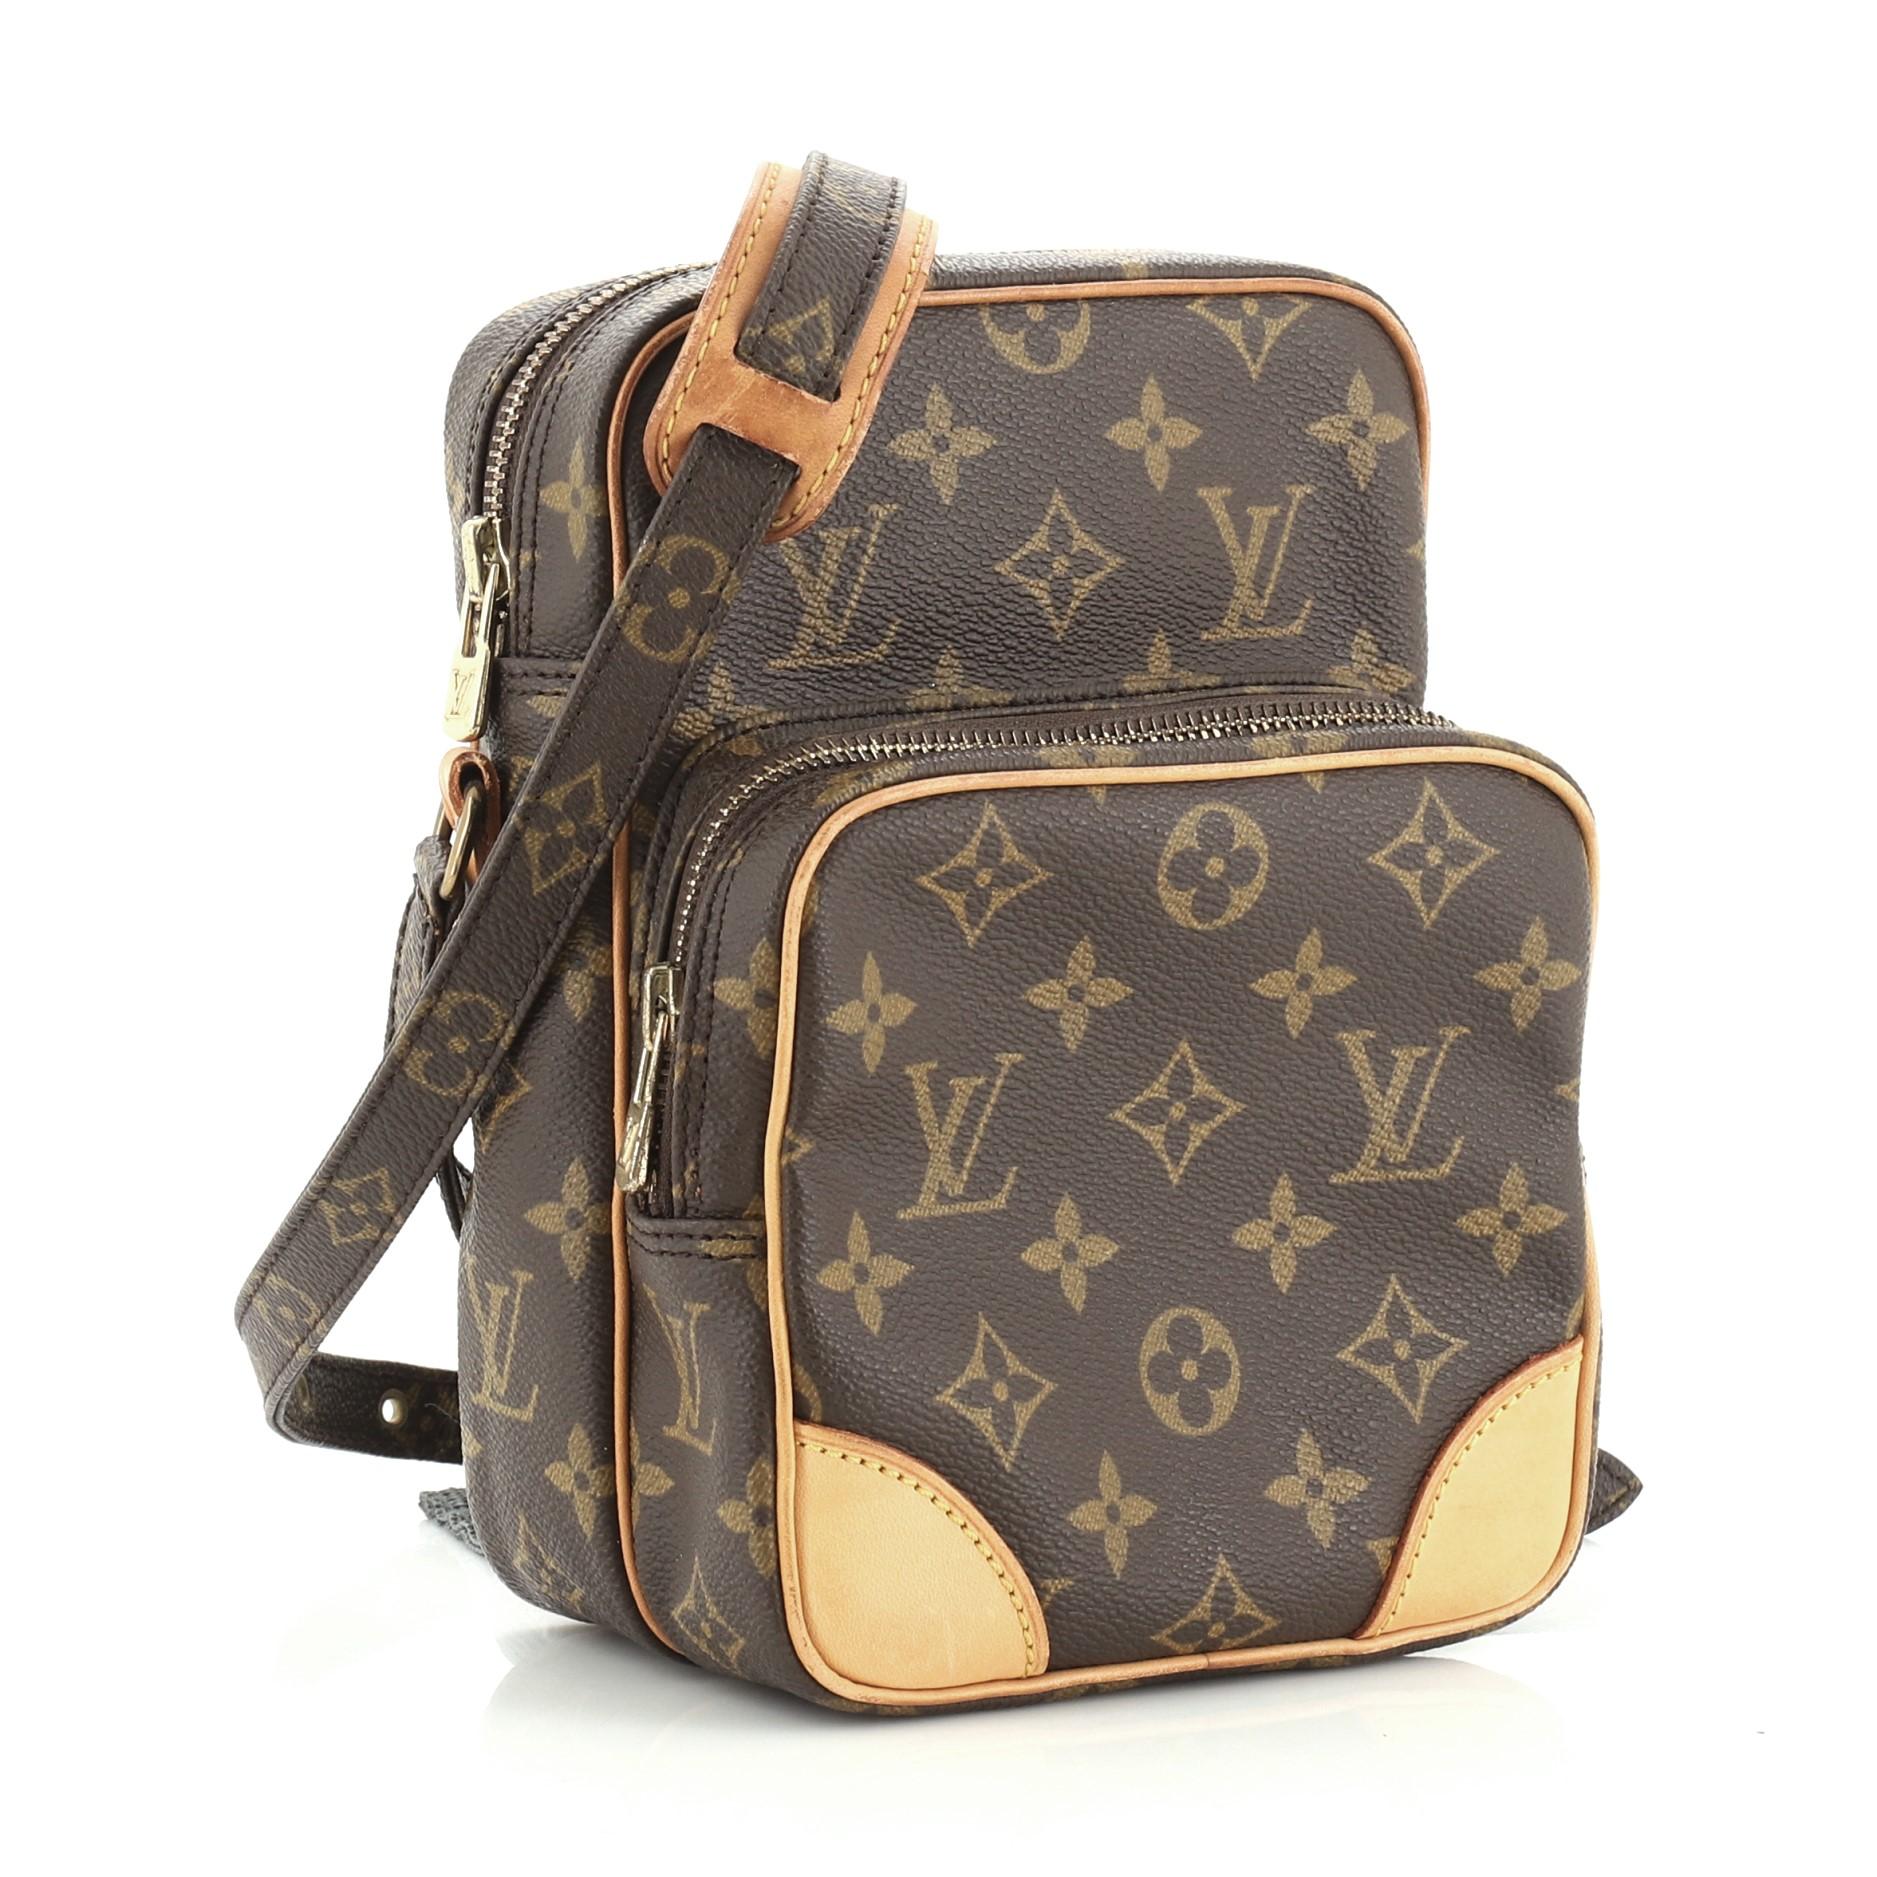 This Louis Vuitton Amazone Bag Monogram Canvas, crafted with brown monogram coated canvas, features an adjustable strap, front zip pocket and gold-tone hardware. Its top zip closure opens to a brown leather interior with slip pocket. Authenticity